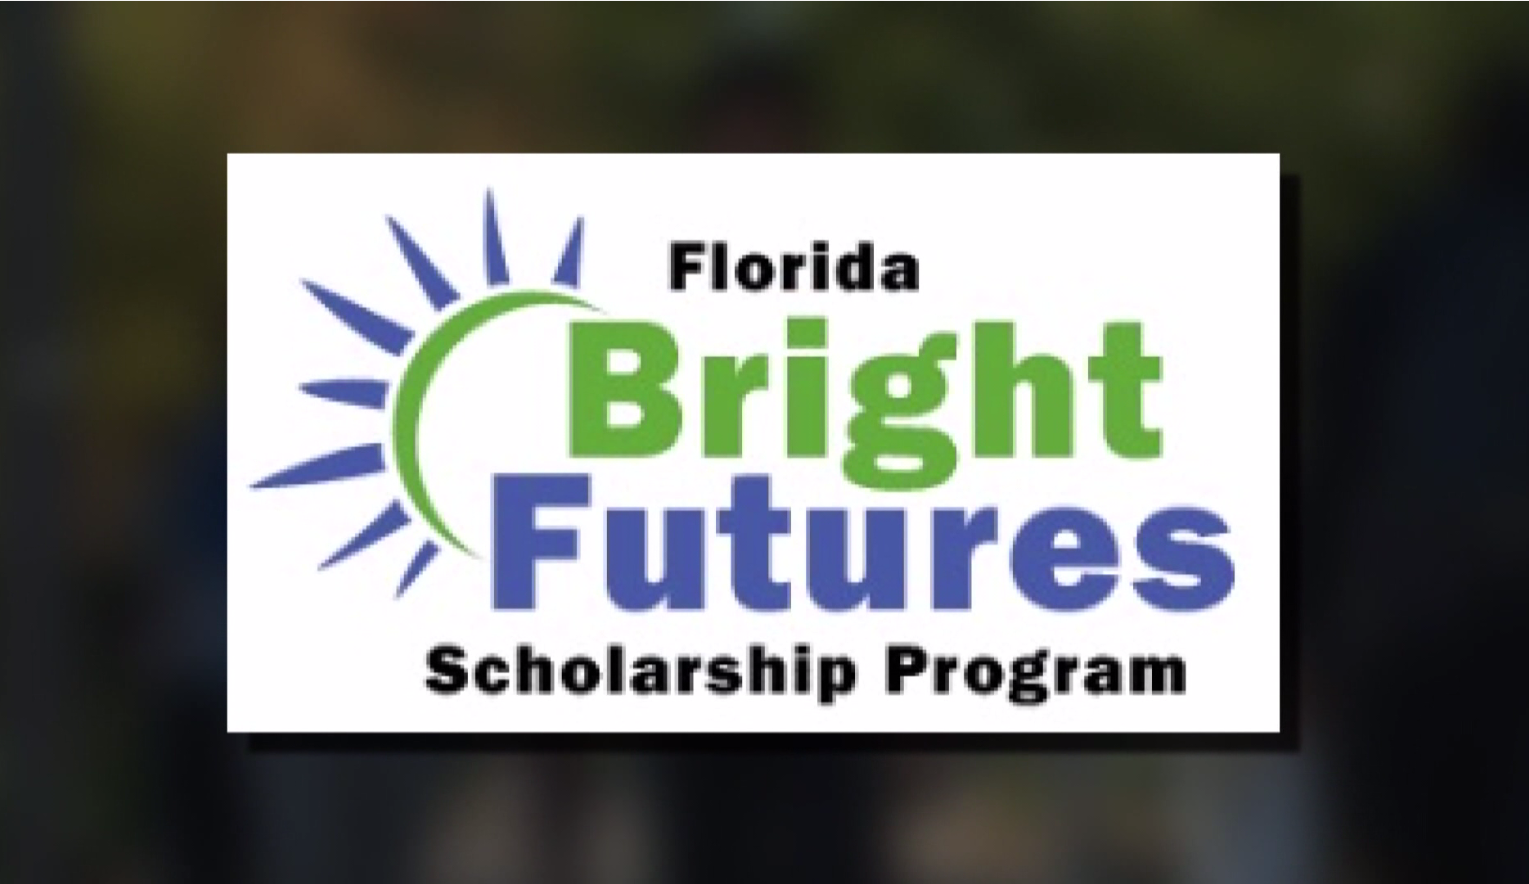 A bill to cut scholarships for 'Bright Futures' students is back on the